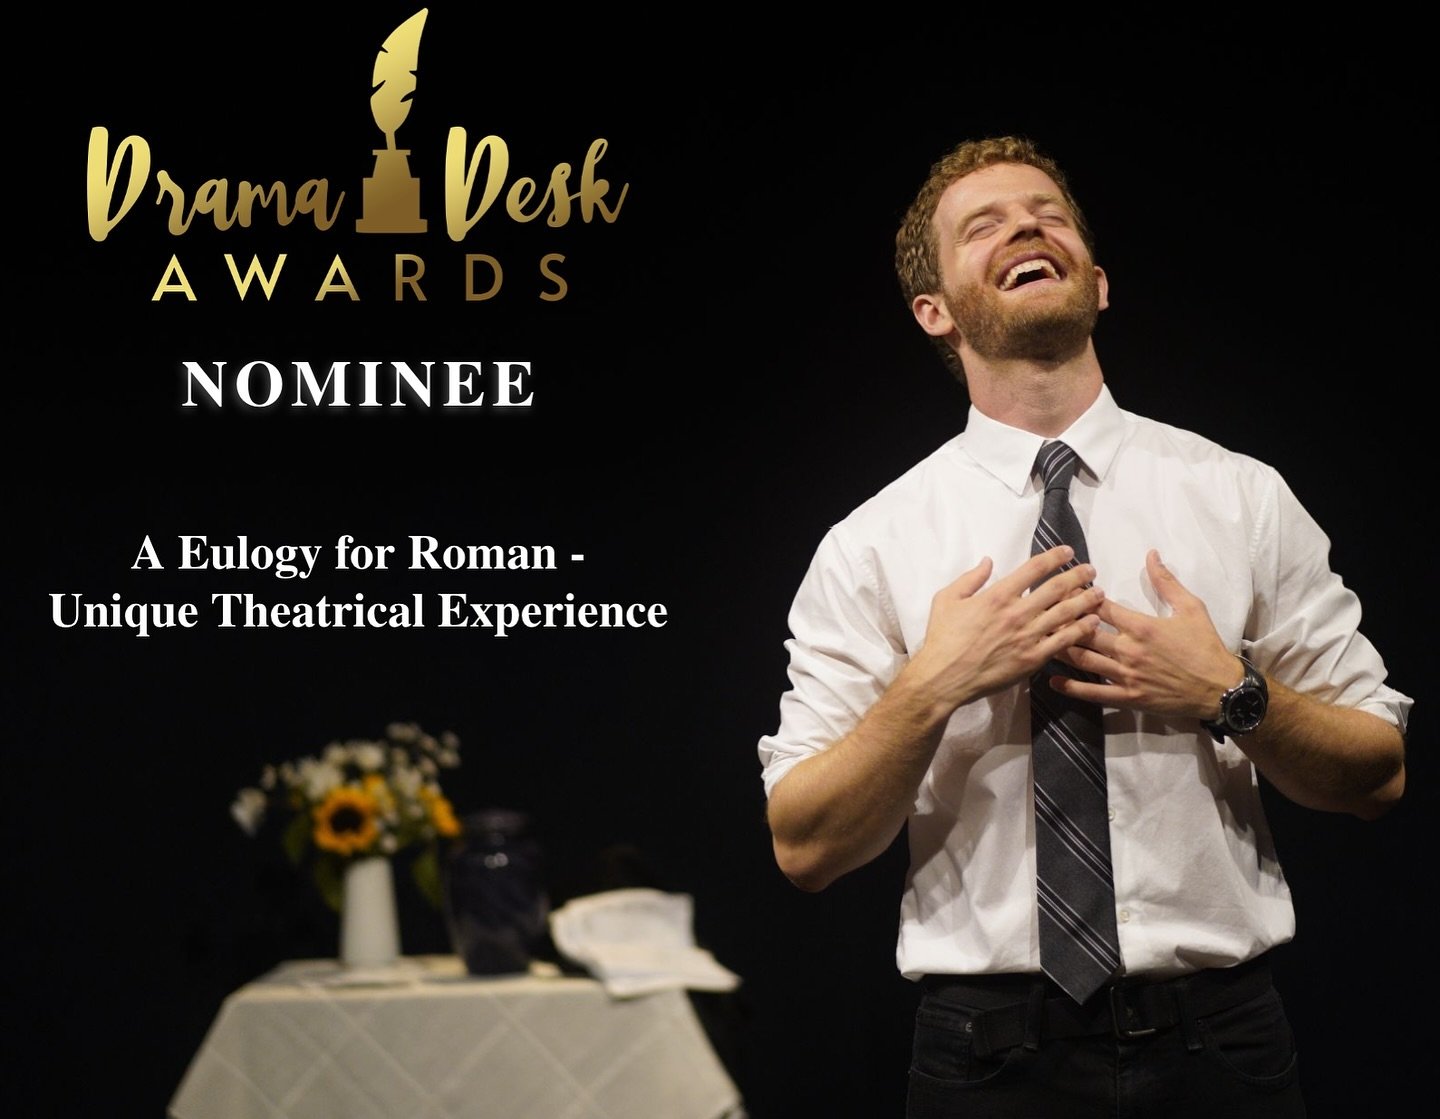 A Eulogy For Roman is thrilled to announce we are a Drama Desk Nominee for Unique Theatrical Experience! 

Thank you so much to everyone who participated in this show&rsquo;s journey (sometimes literally!) both onstage and off. Thank you to @59e59 fo